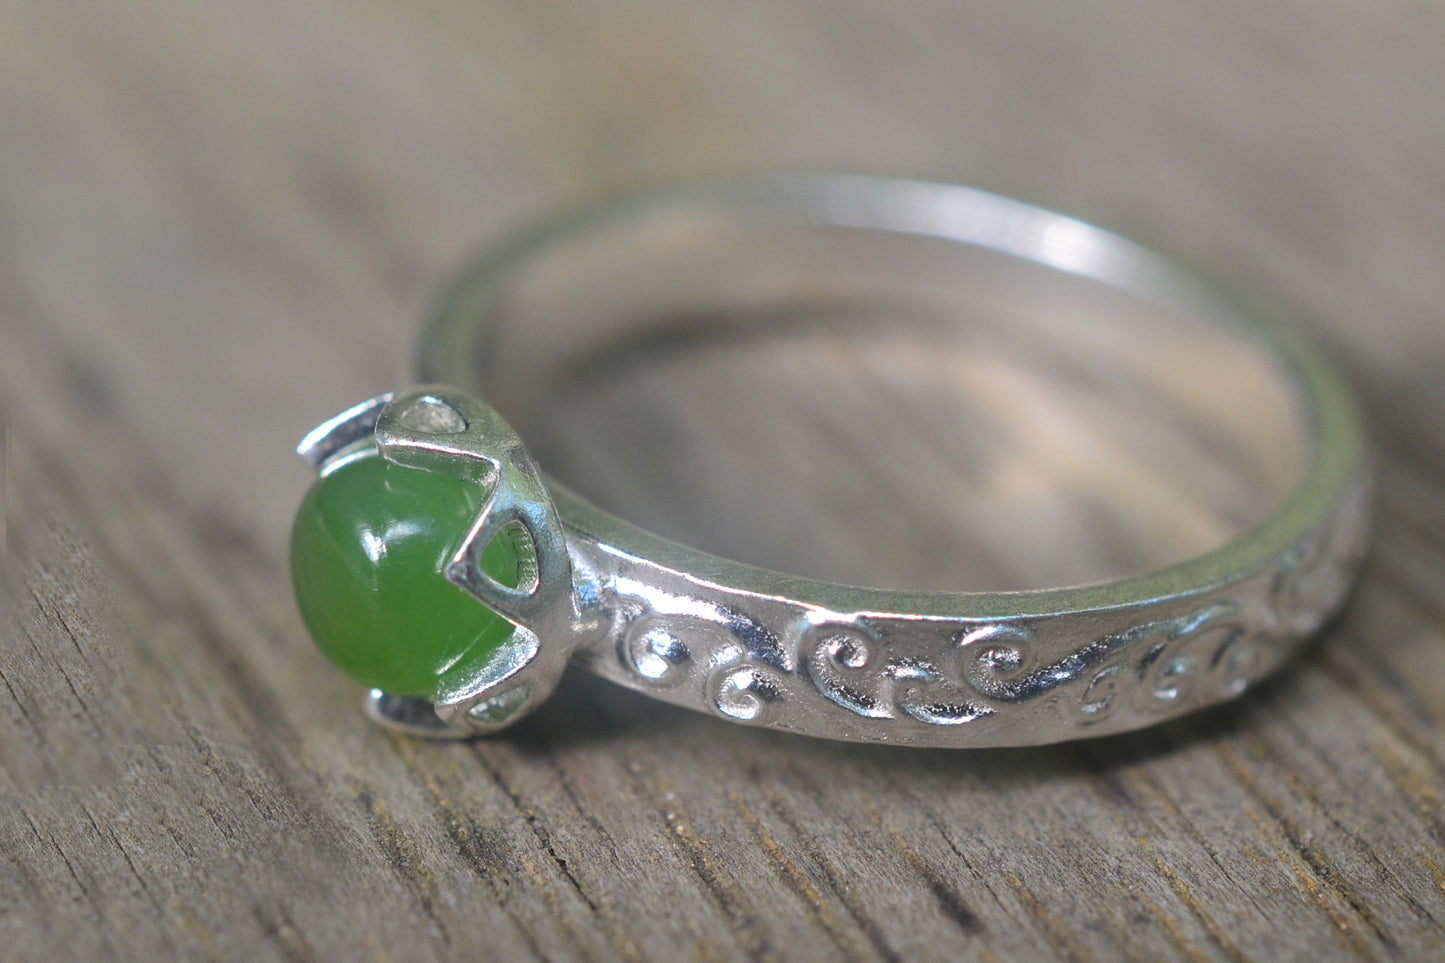 5mm Jade Ring With Silver Swirl Design